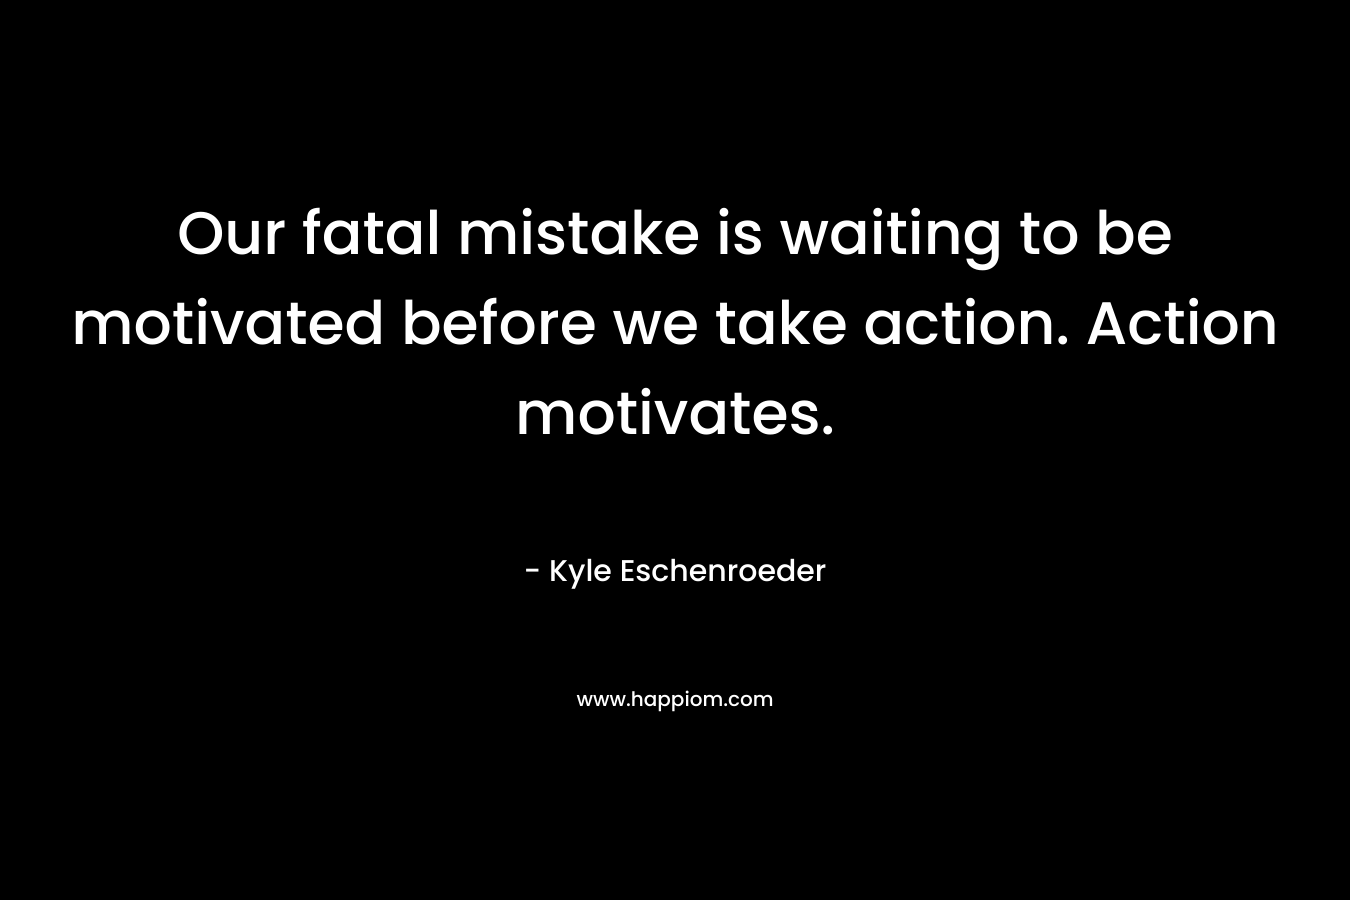 Our fatal mistake is waiting to be motivated before we take action. Action motivates. – Kyle Eschenroeder